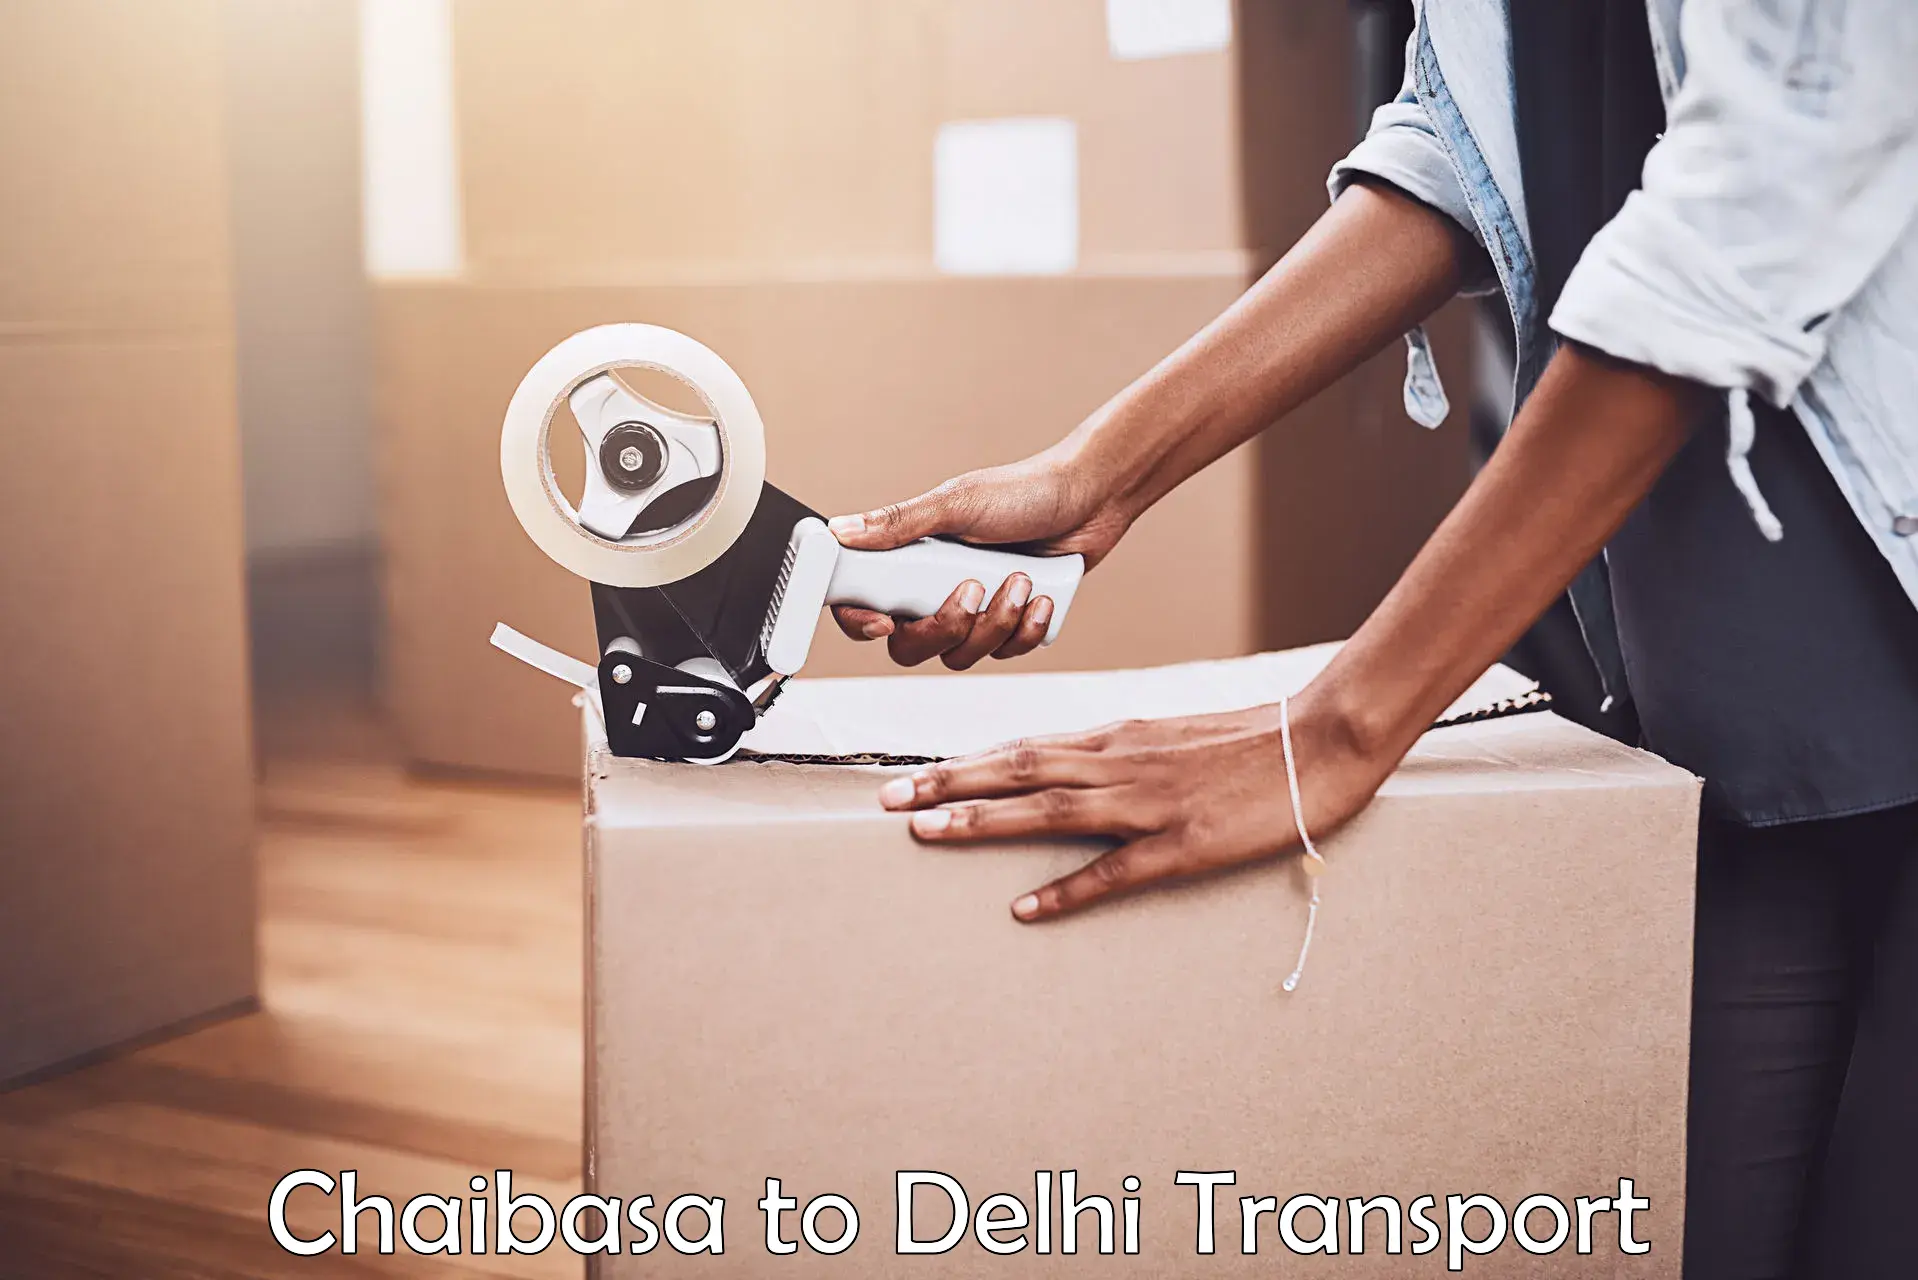 Container transport service Chaibasa to Delhi Technological University DTU